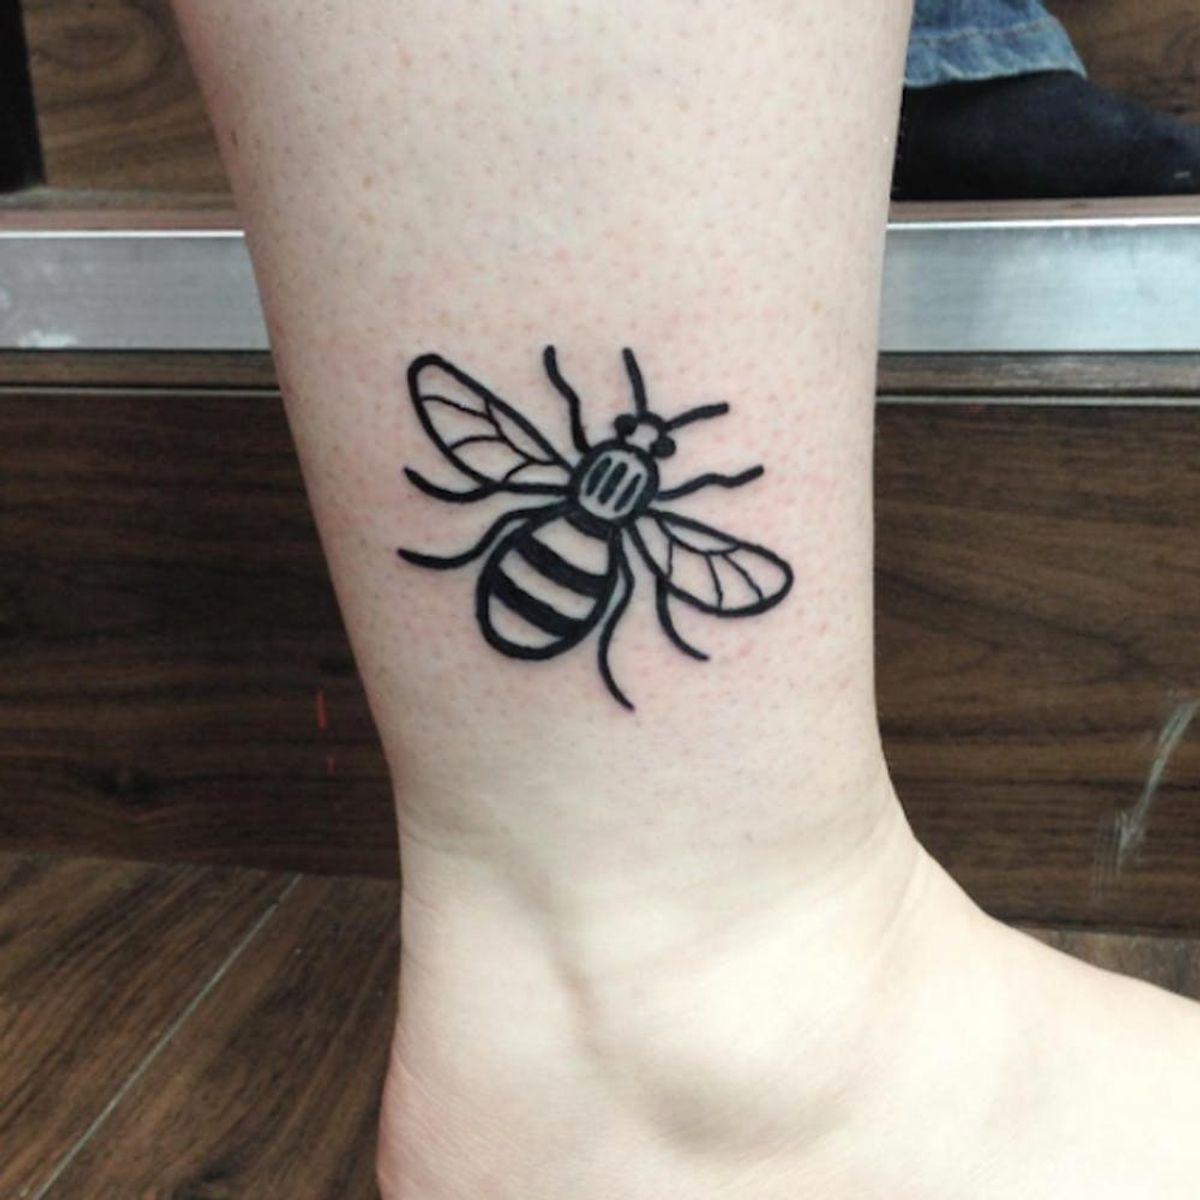 Why People Are Getting Bee Tattoos to Support the Victims from the Manchester Attack